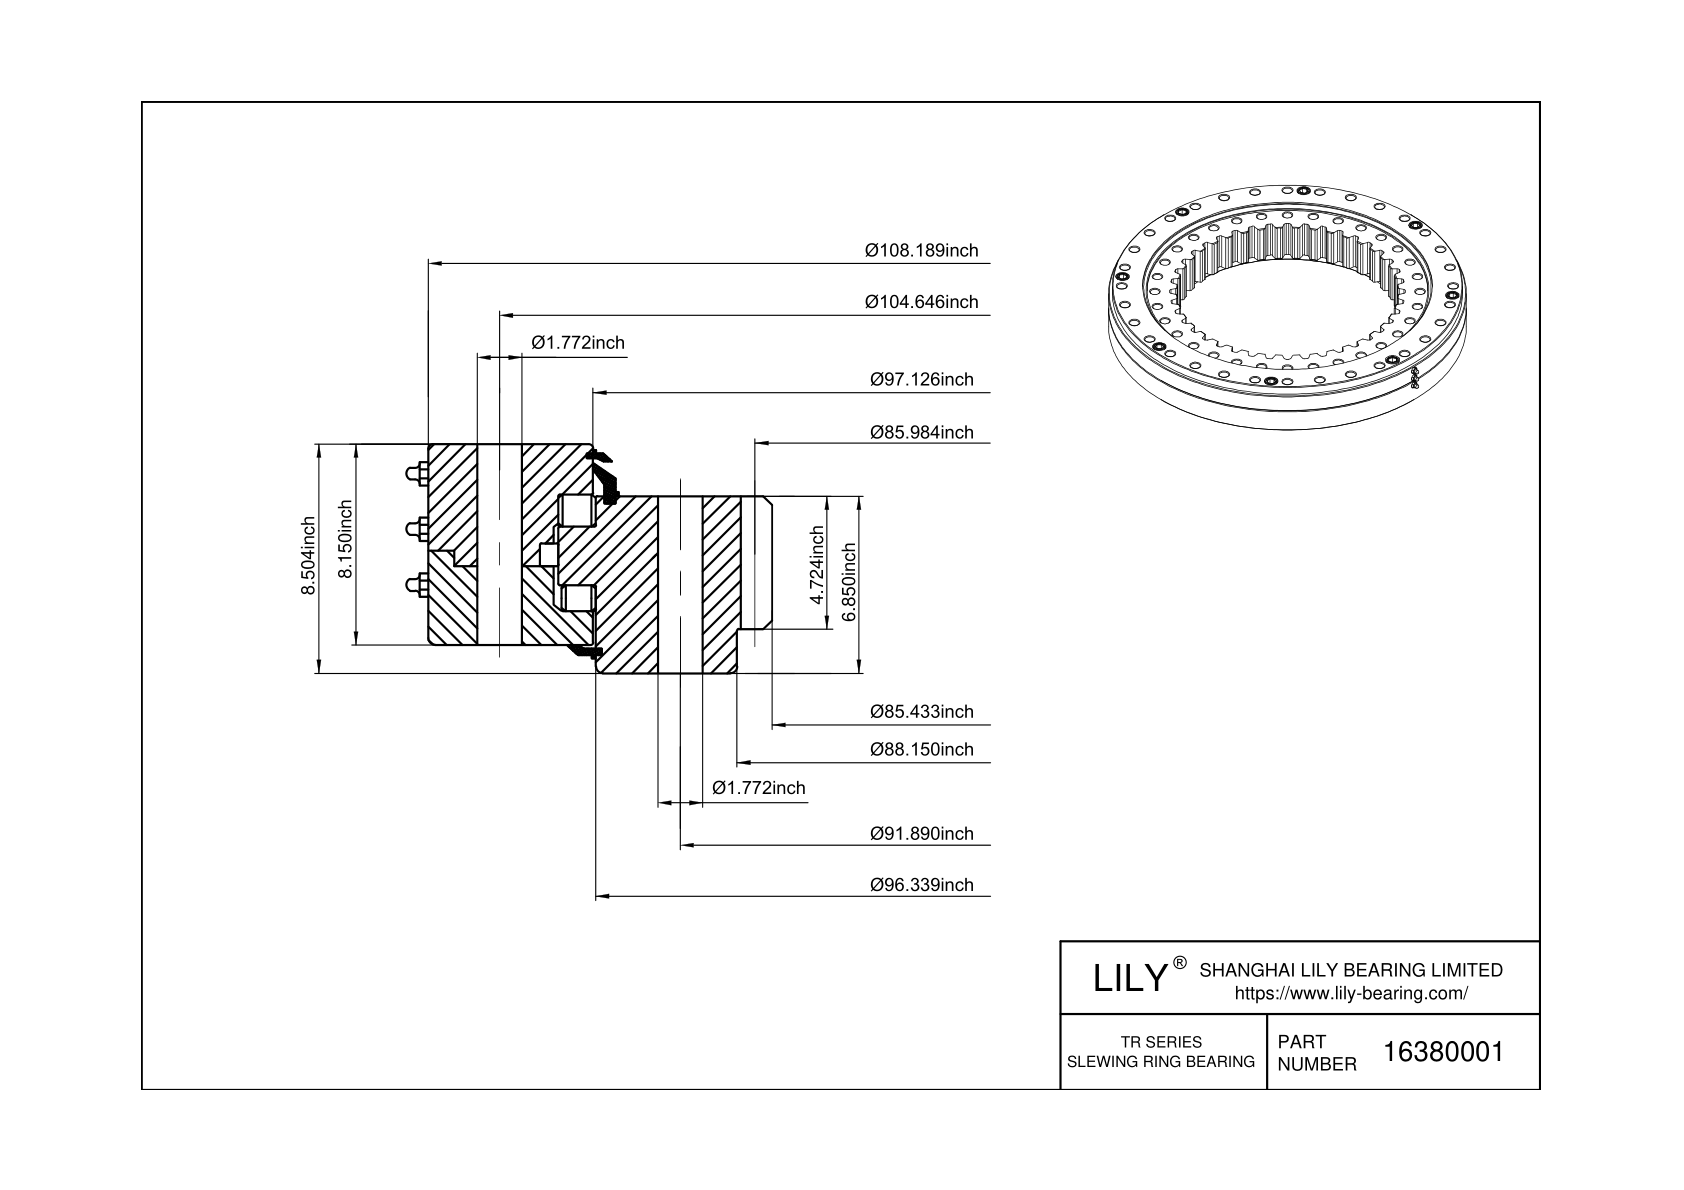 16380001 TR Series cad drawing